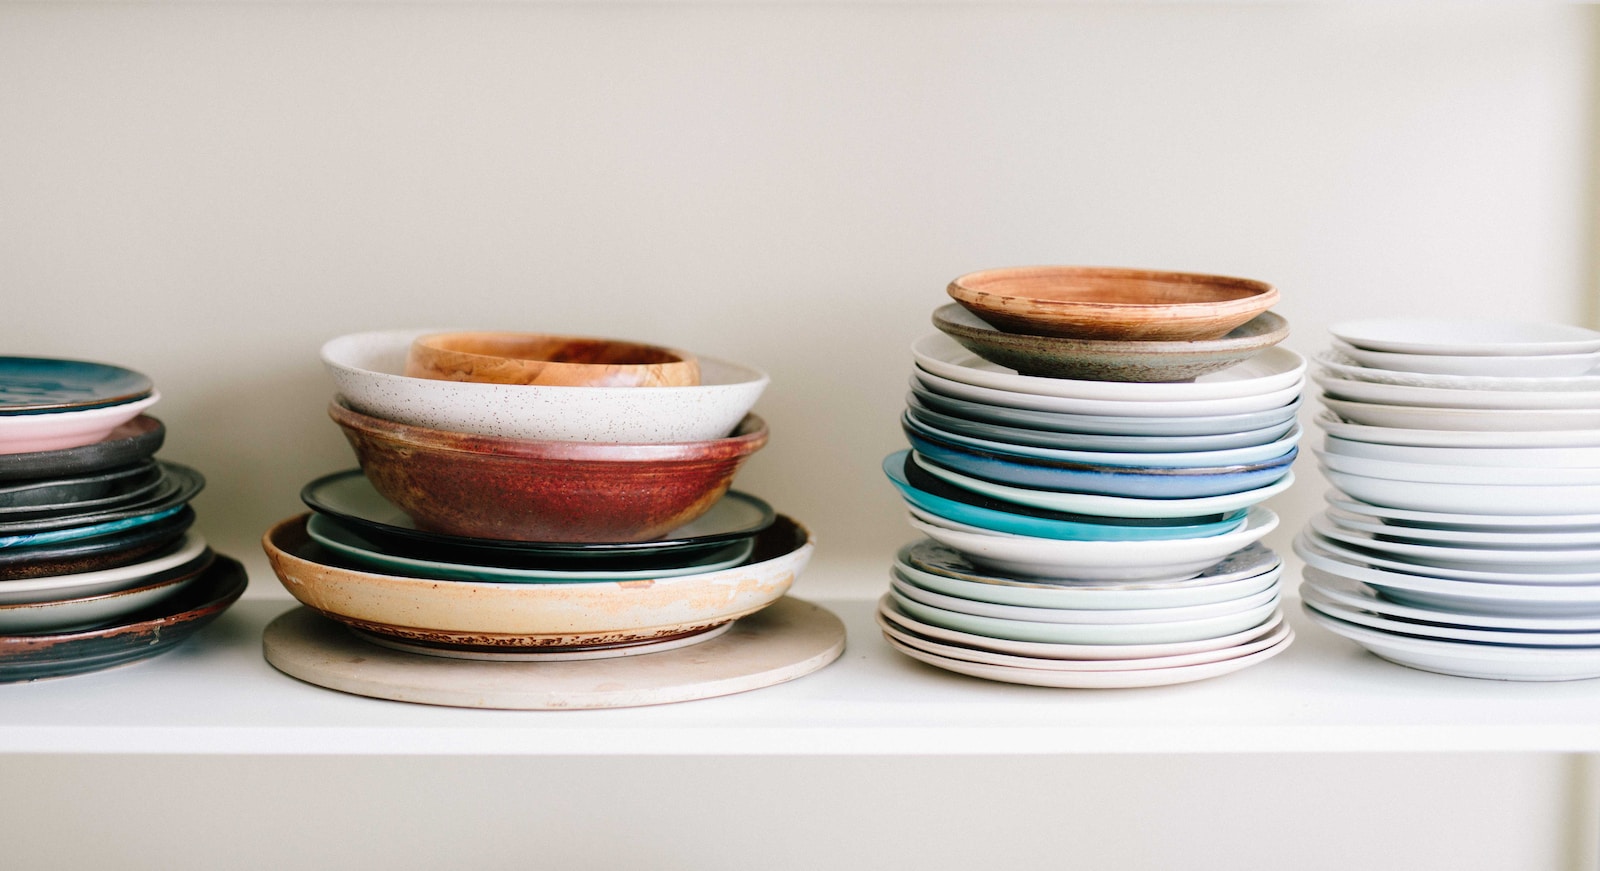 Dishware Organizing Hacks That Save You Time and Space